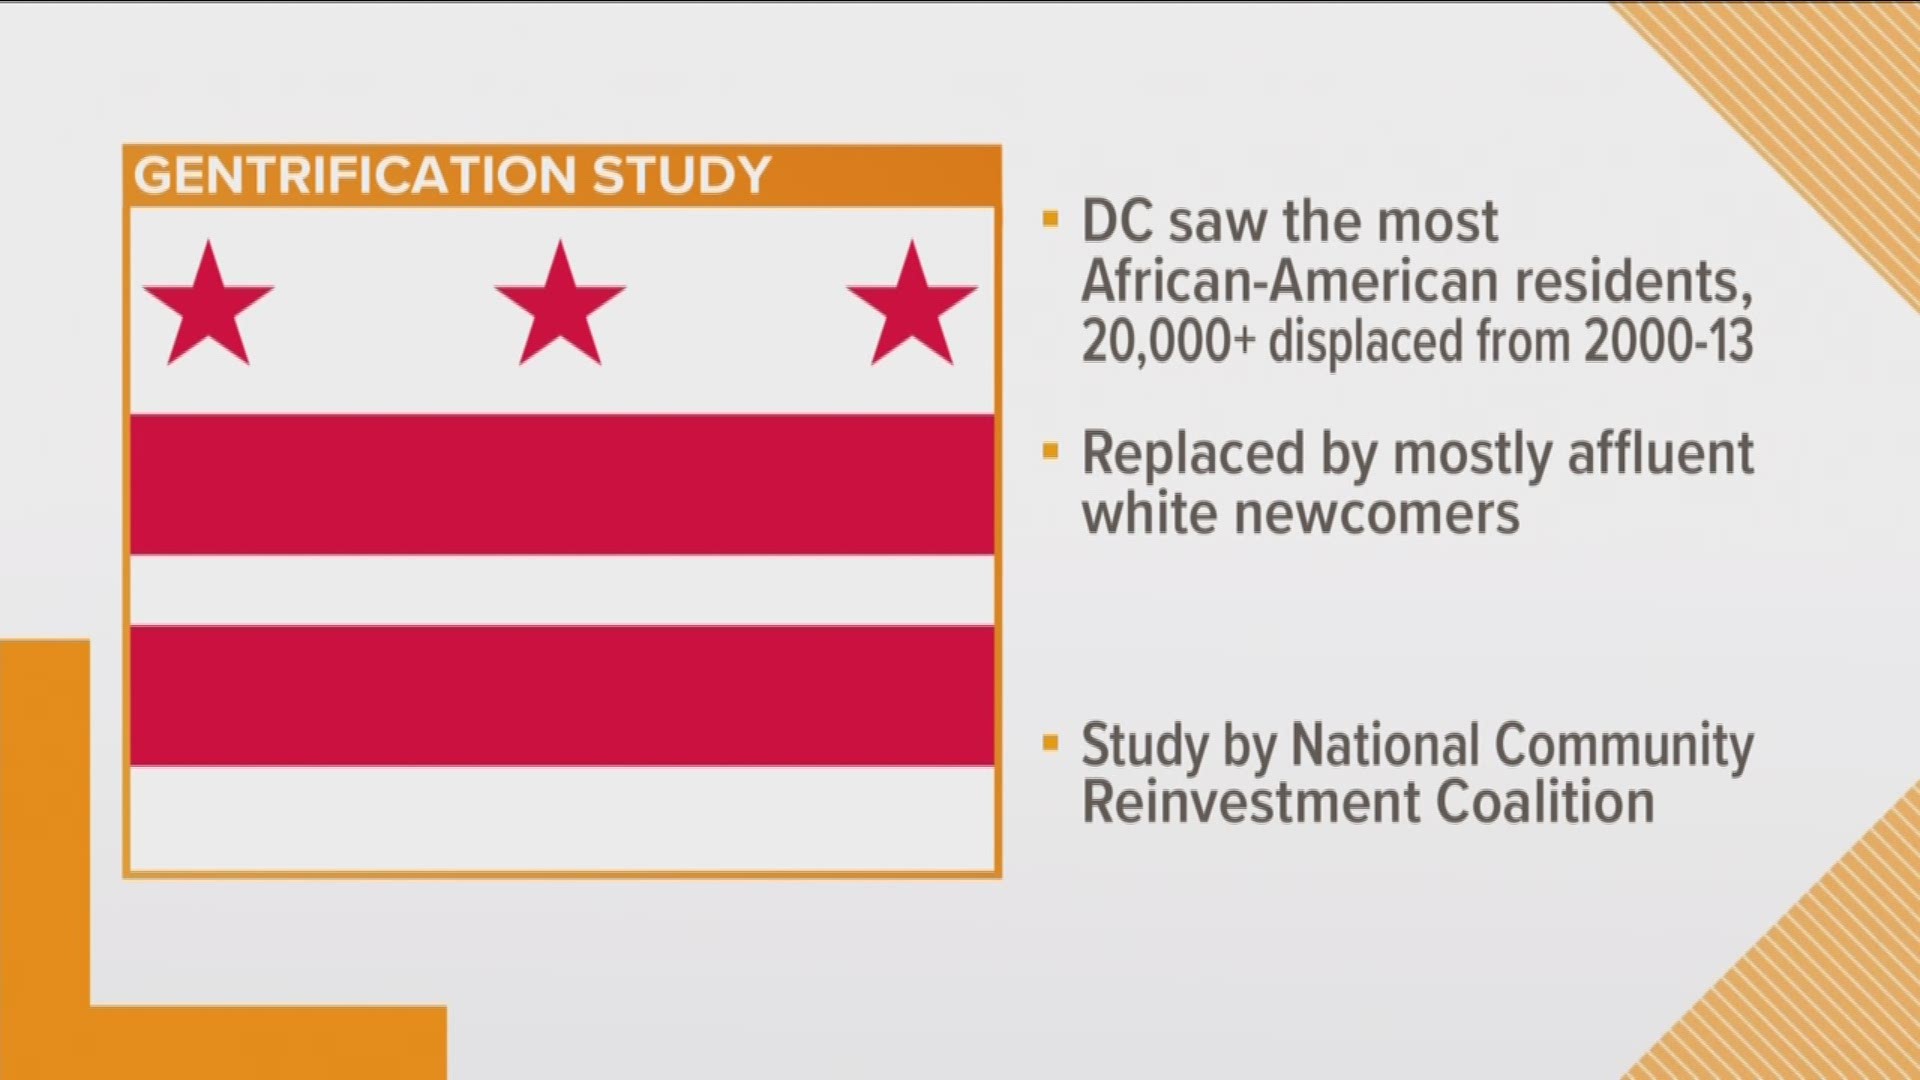 DC also saw the most African-American residents, more than 20,000 displaced from their neighborhood from 2000 to 2013.